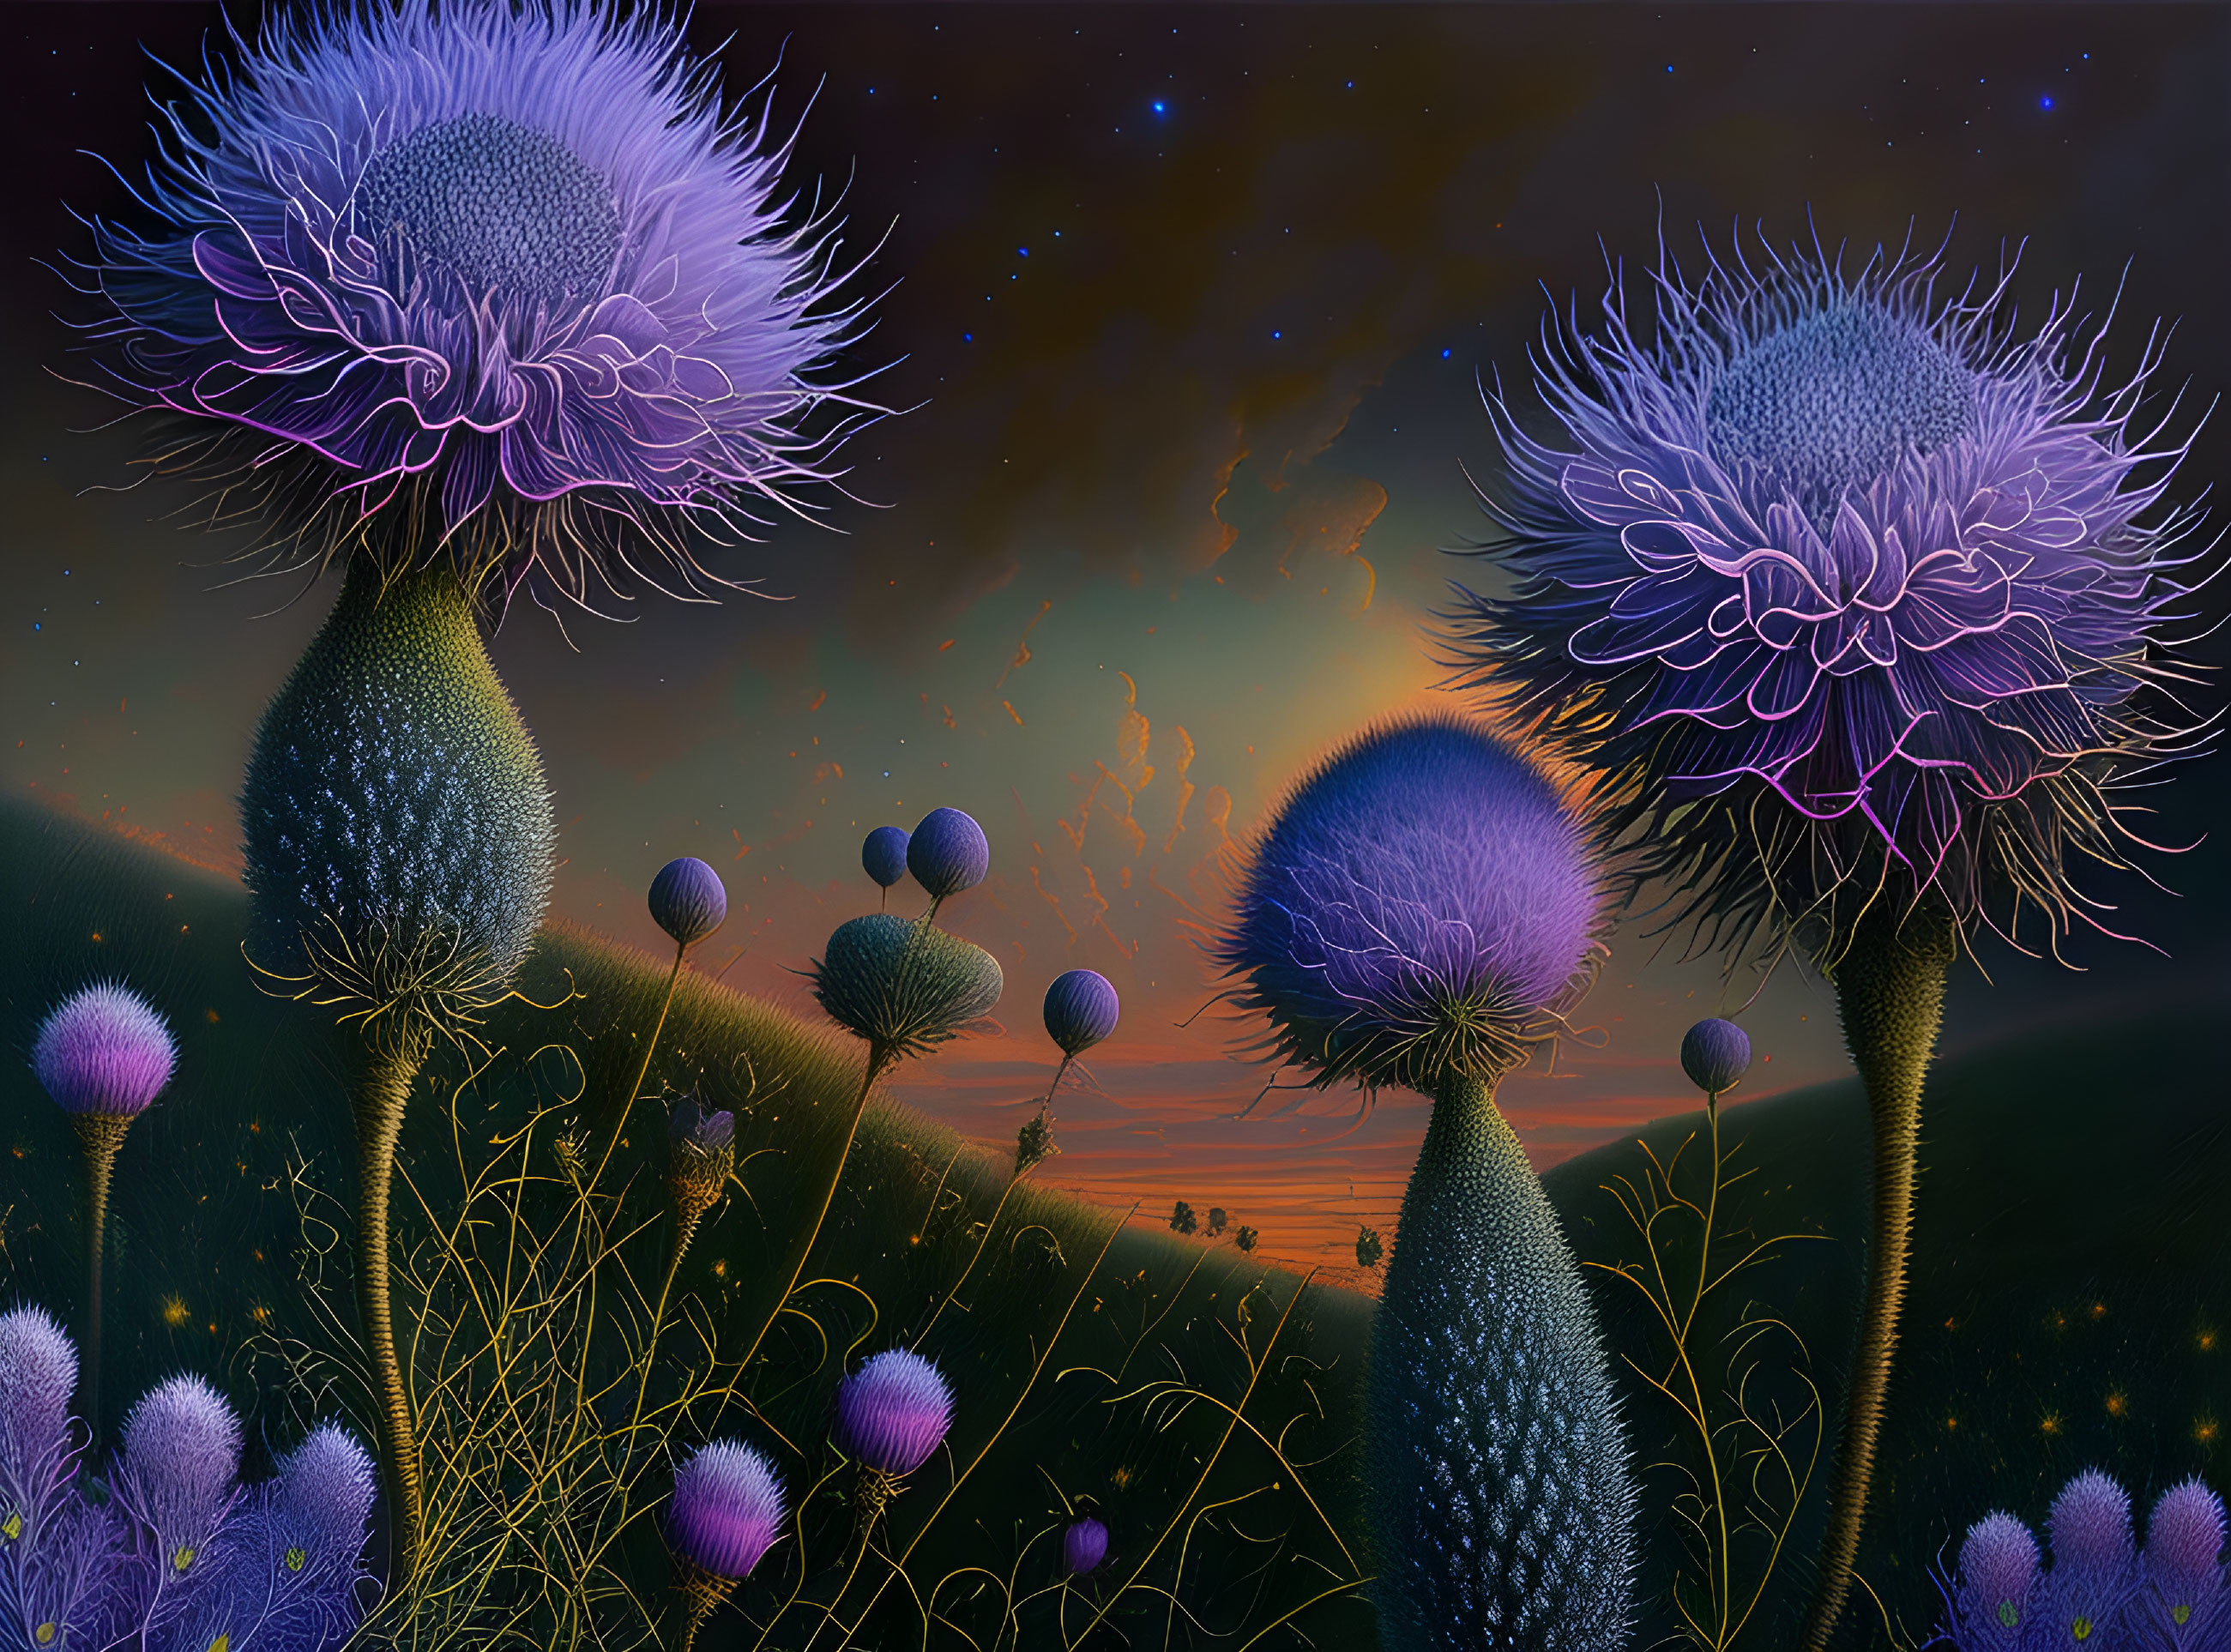 Thistles In The Night